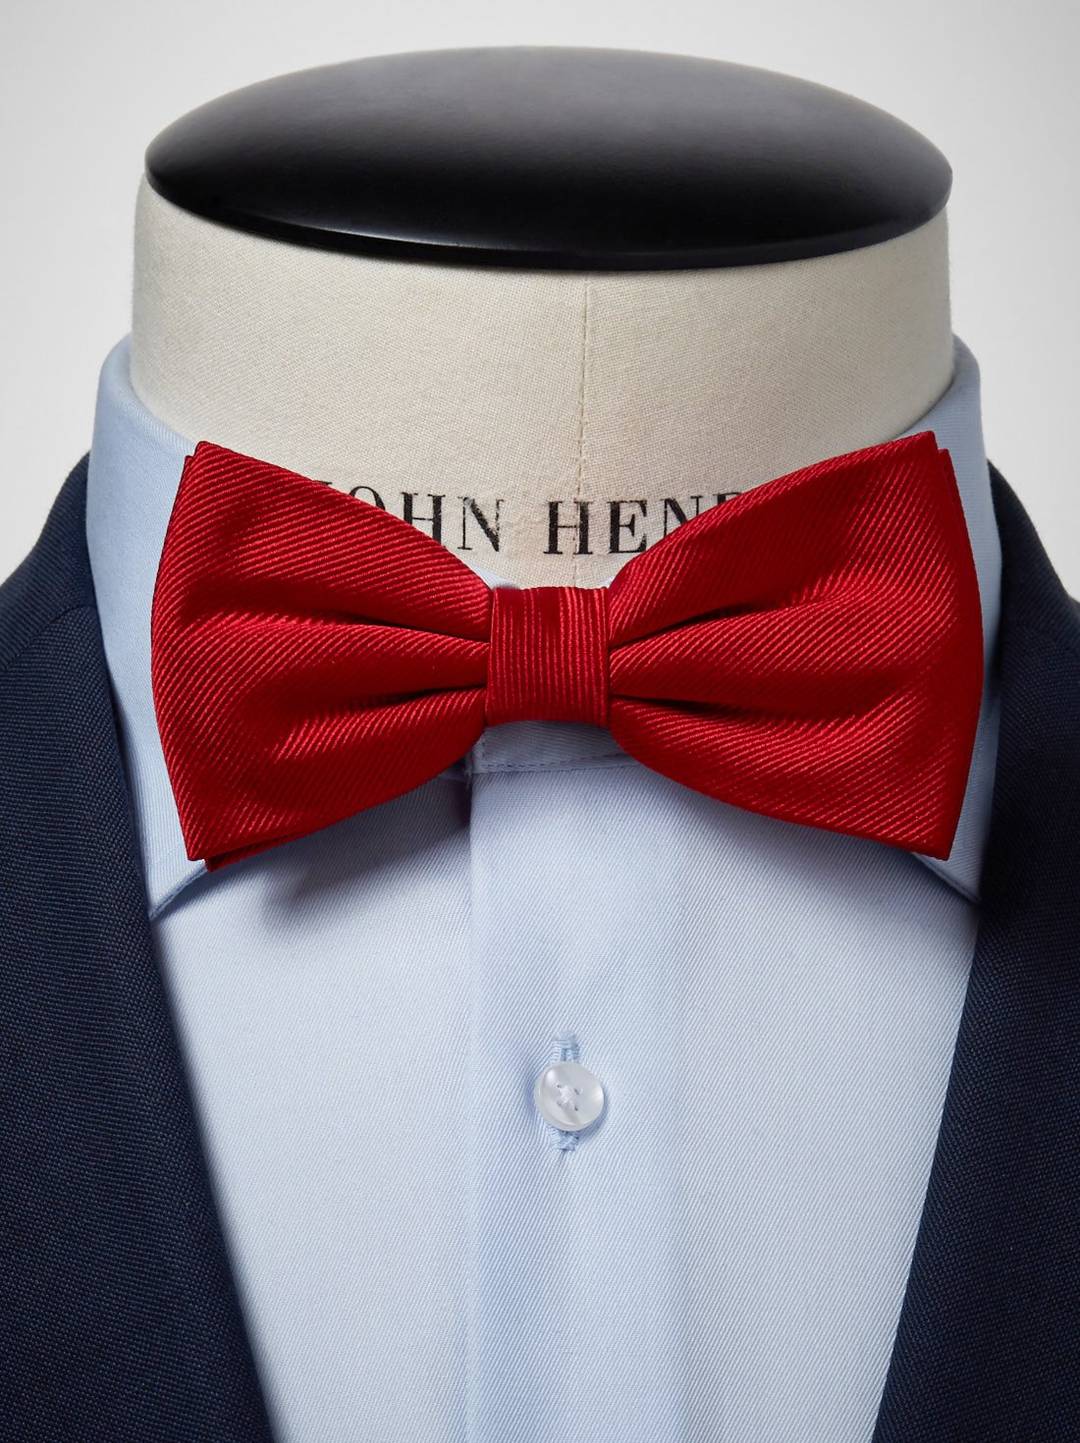 Plain Satin Bow Tie - Red, Shop Today. Get it Tomorrow!